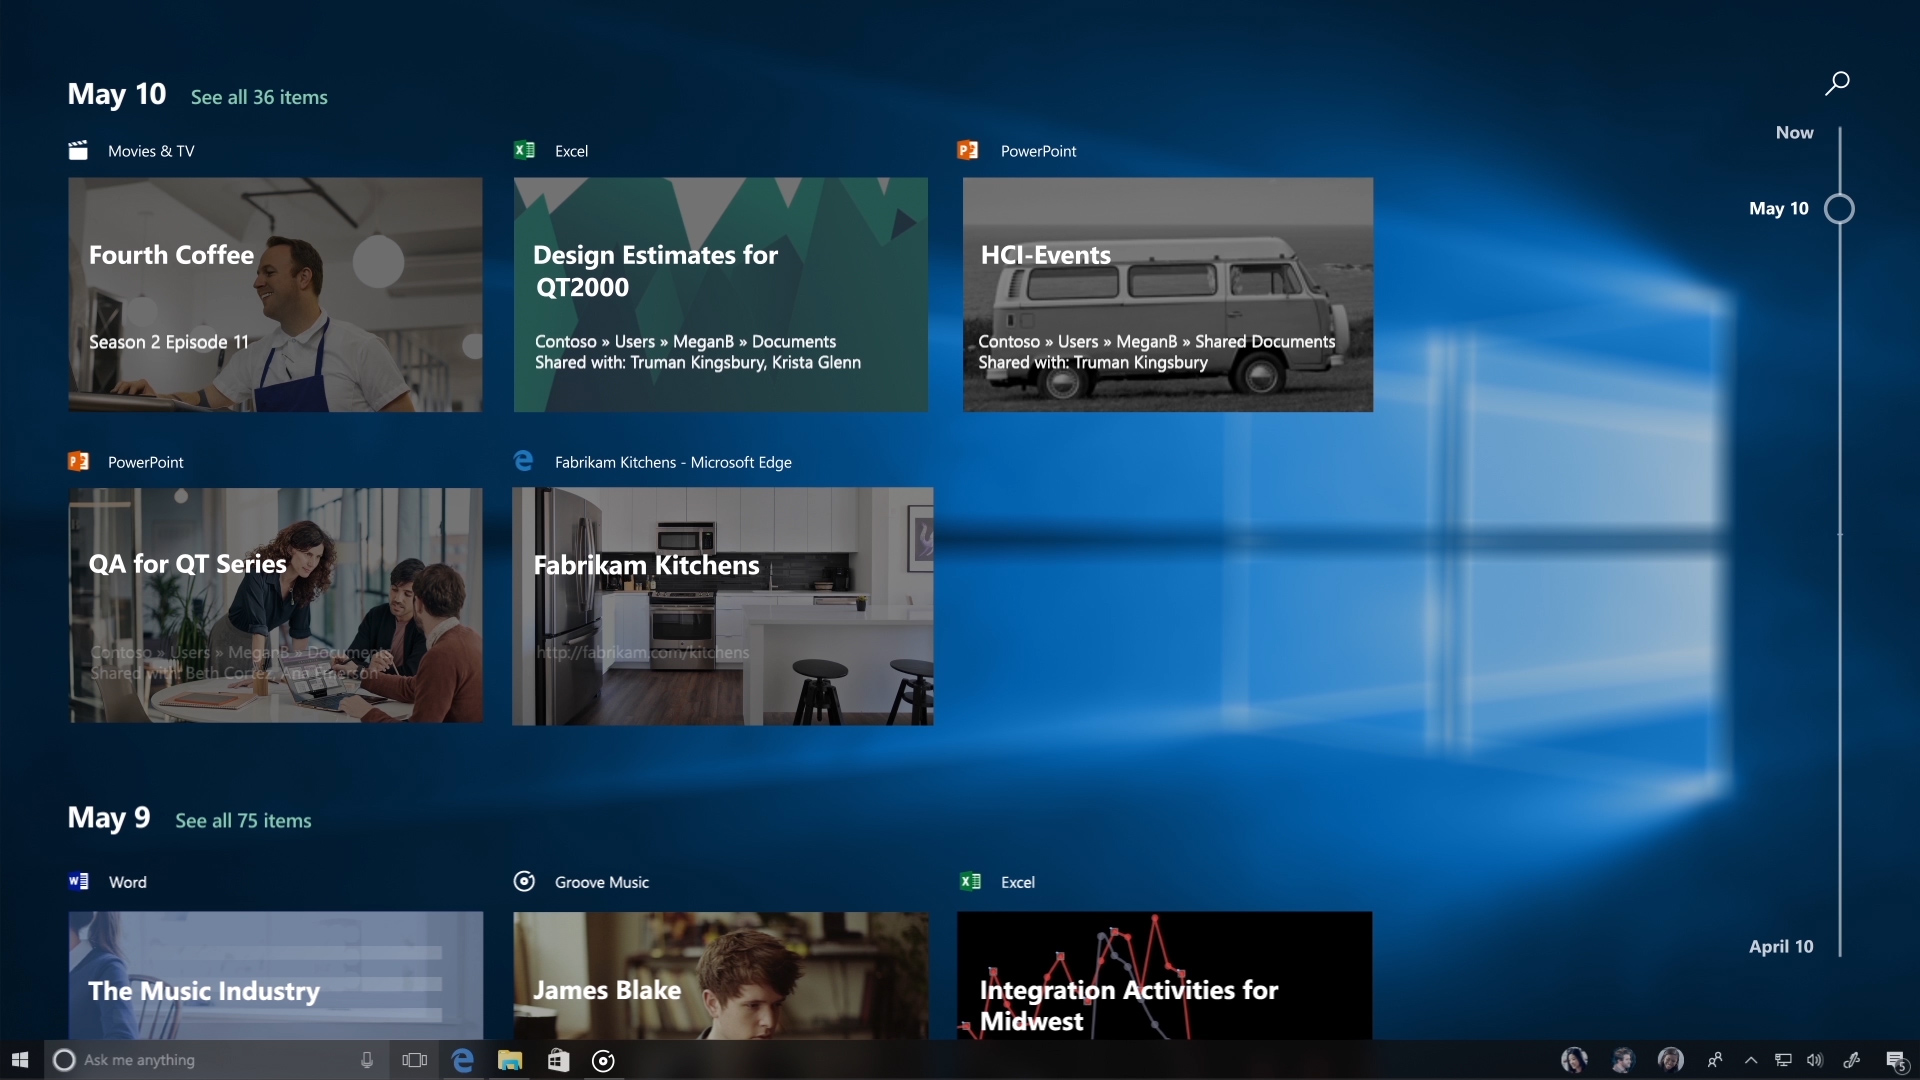 Timeline: With Timeline in Windows 10, you can now jump back in time to find what you were working on. With a visual timeline that displays what you were doing when, you can easily hop back into files, apps, and sites as if you never left.